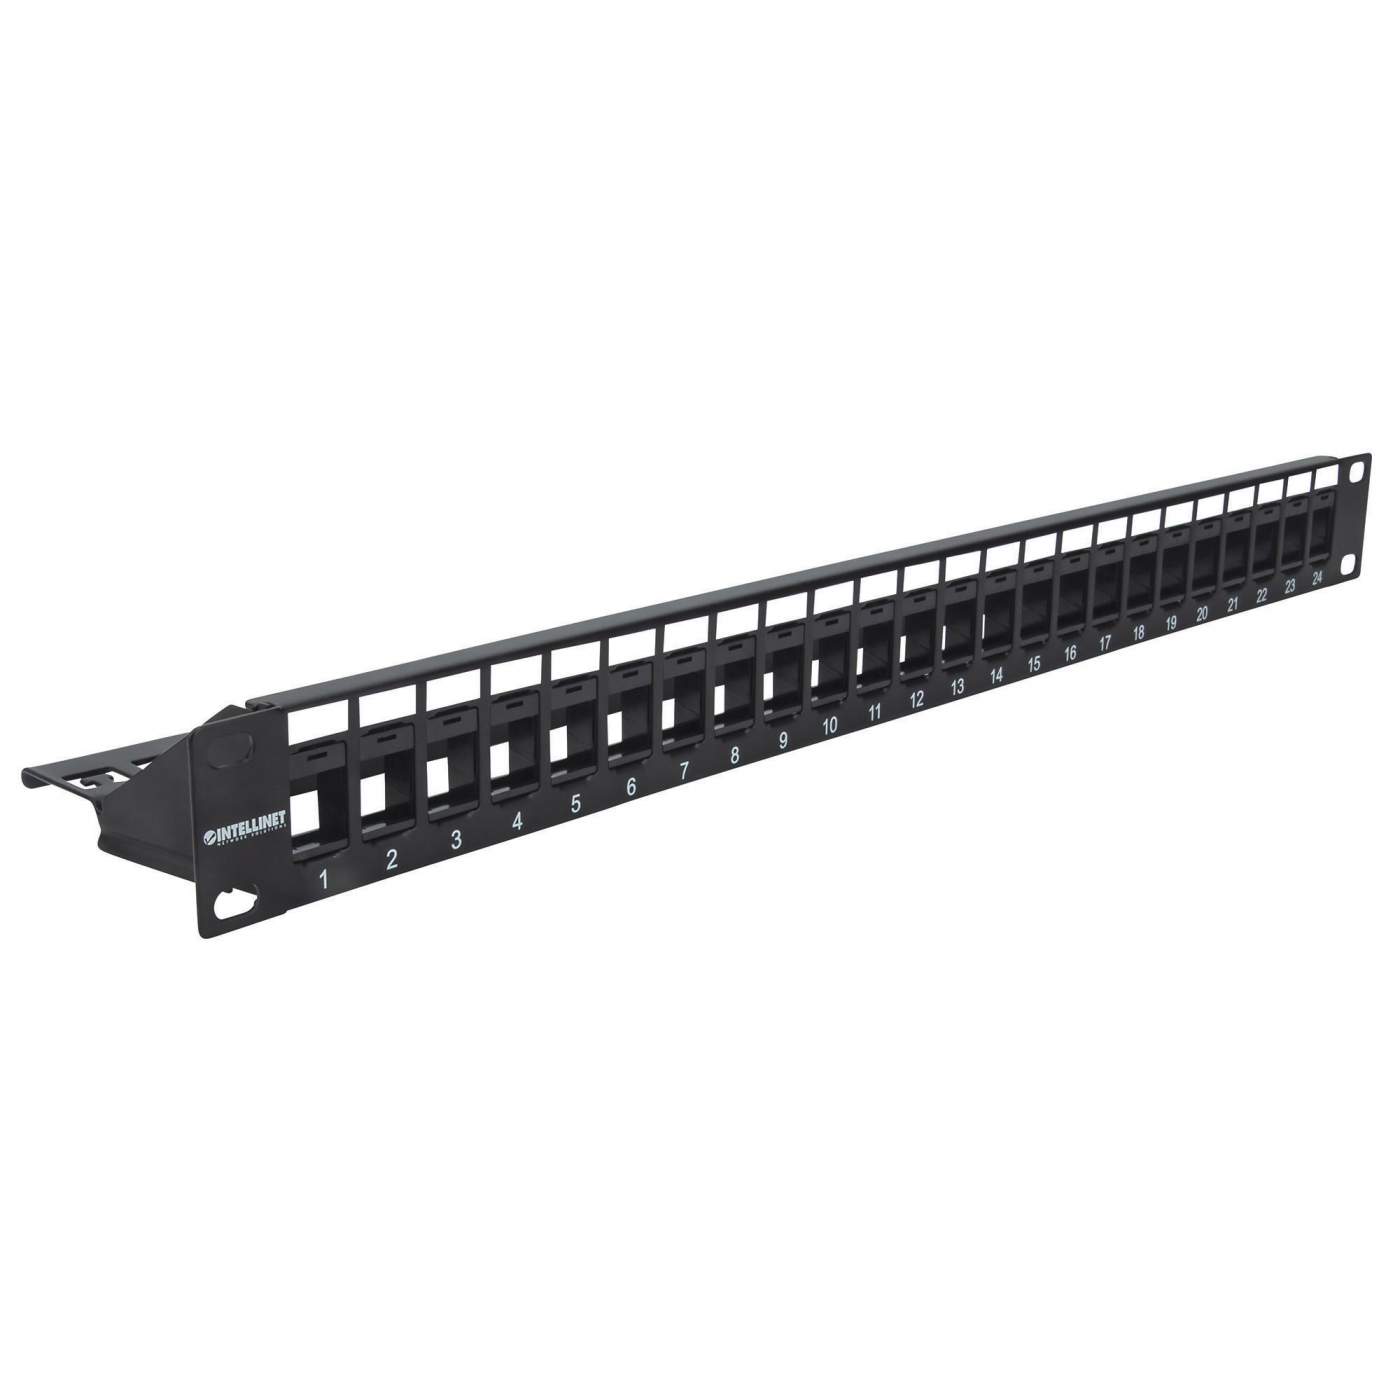 1U High-Density Blank Patch Panel - 24 Port at Cables N More